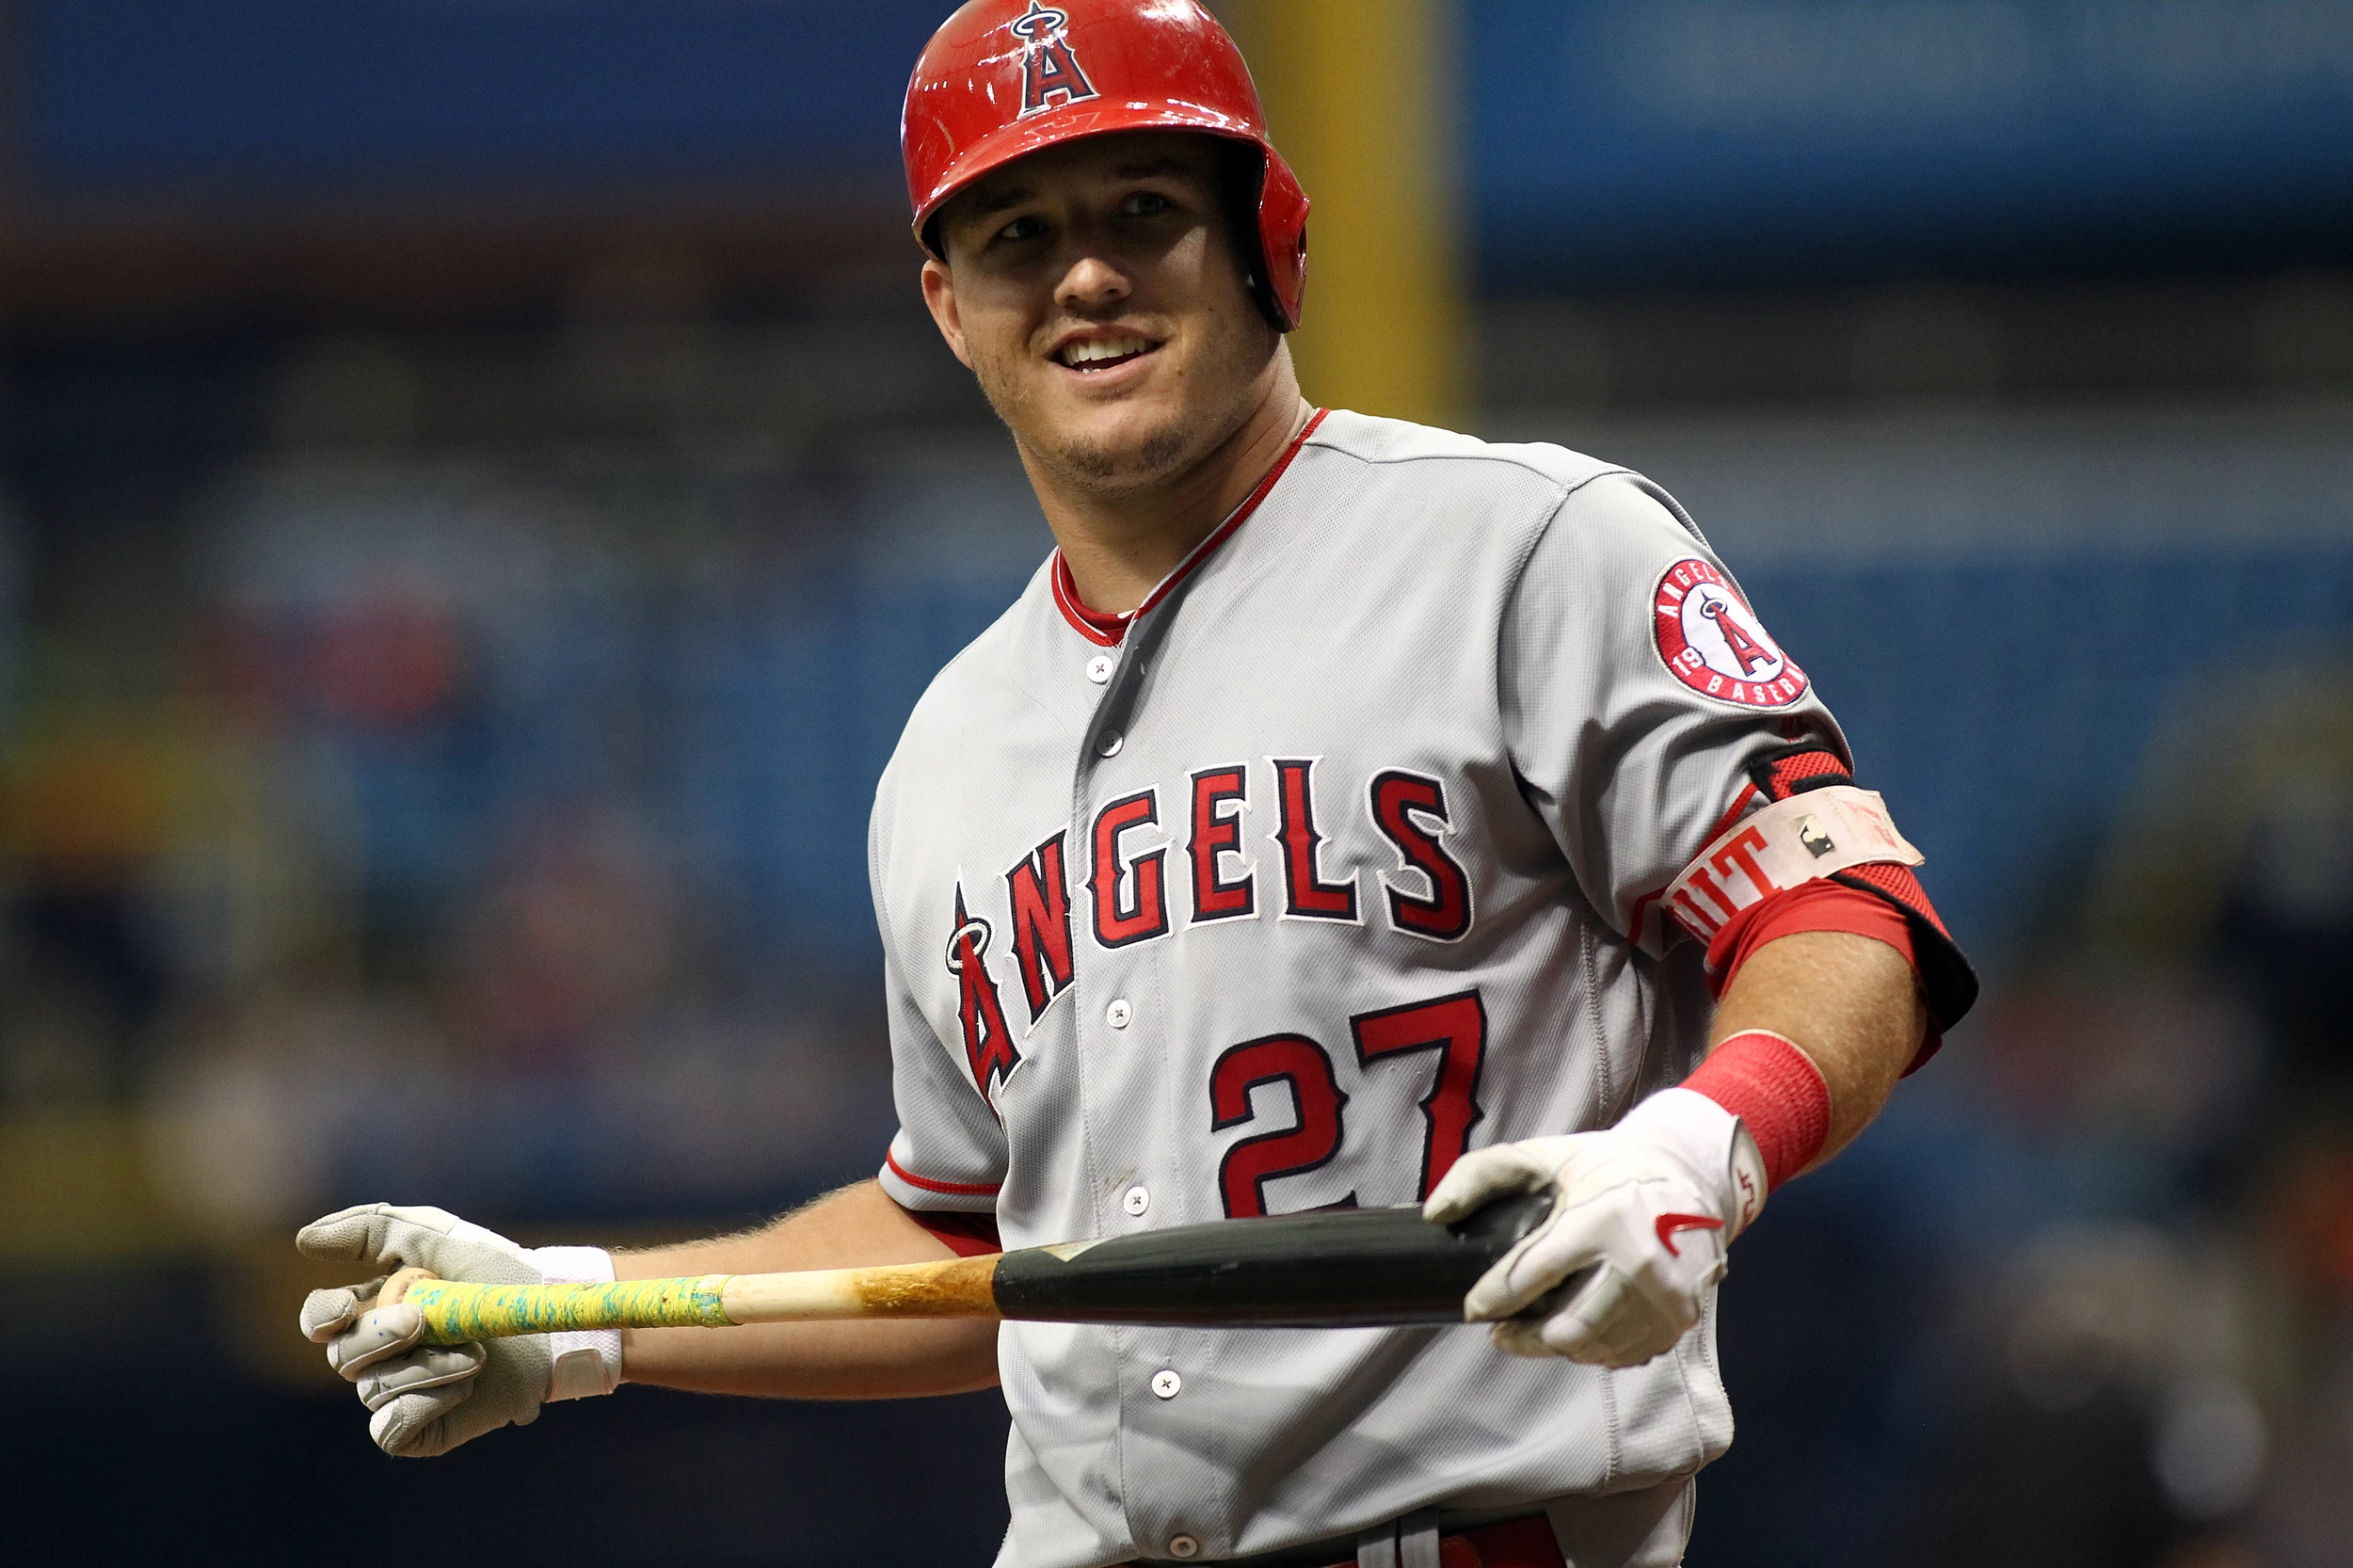 Don't the Angels Kind of Have to Trade Mike Trout?